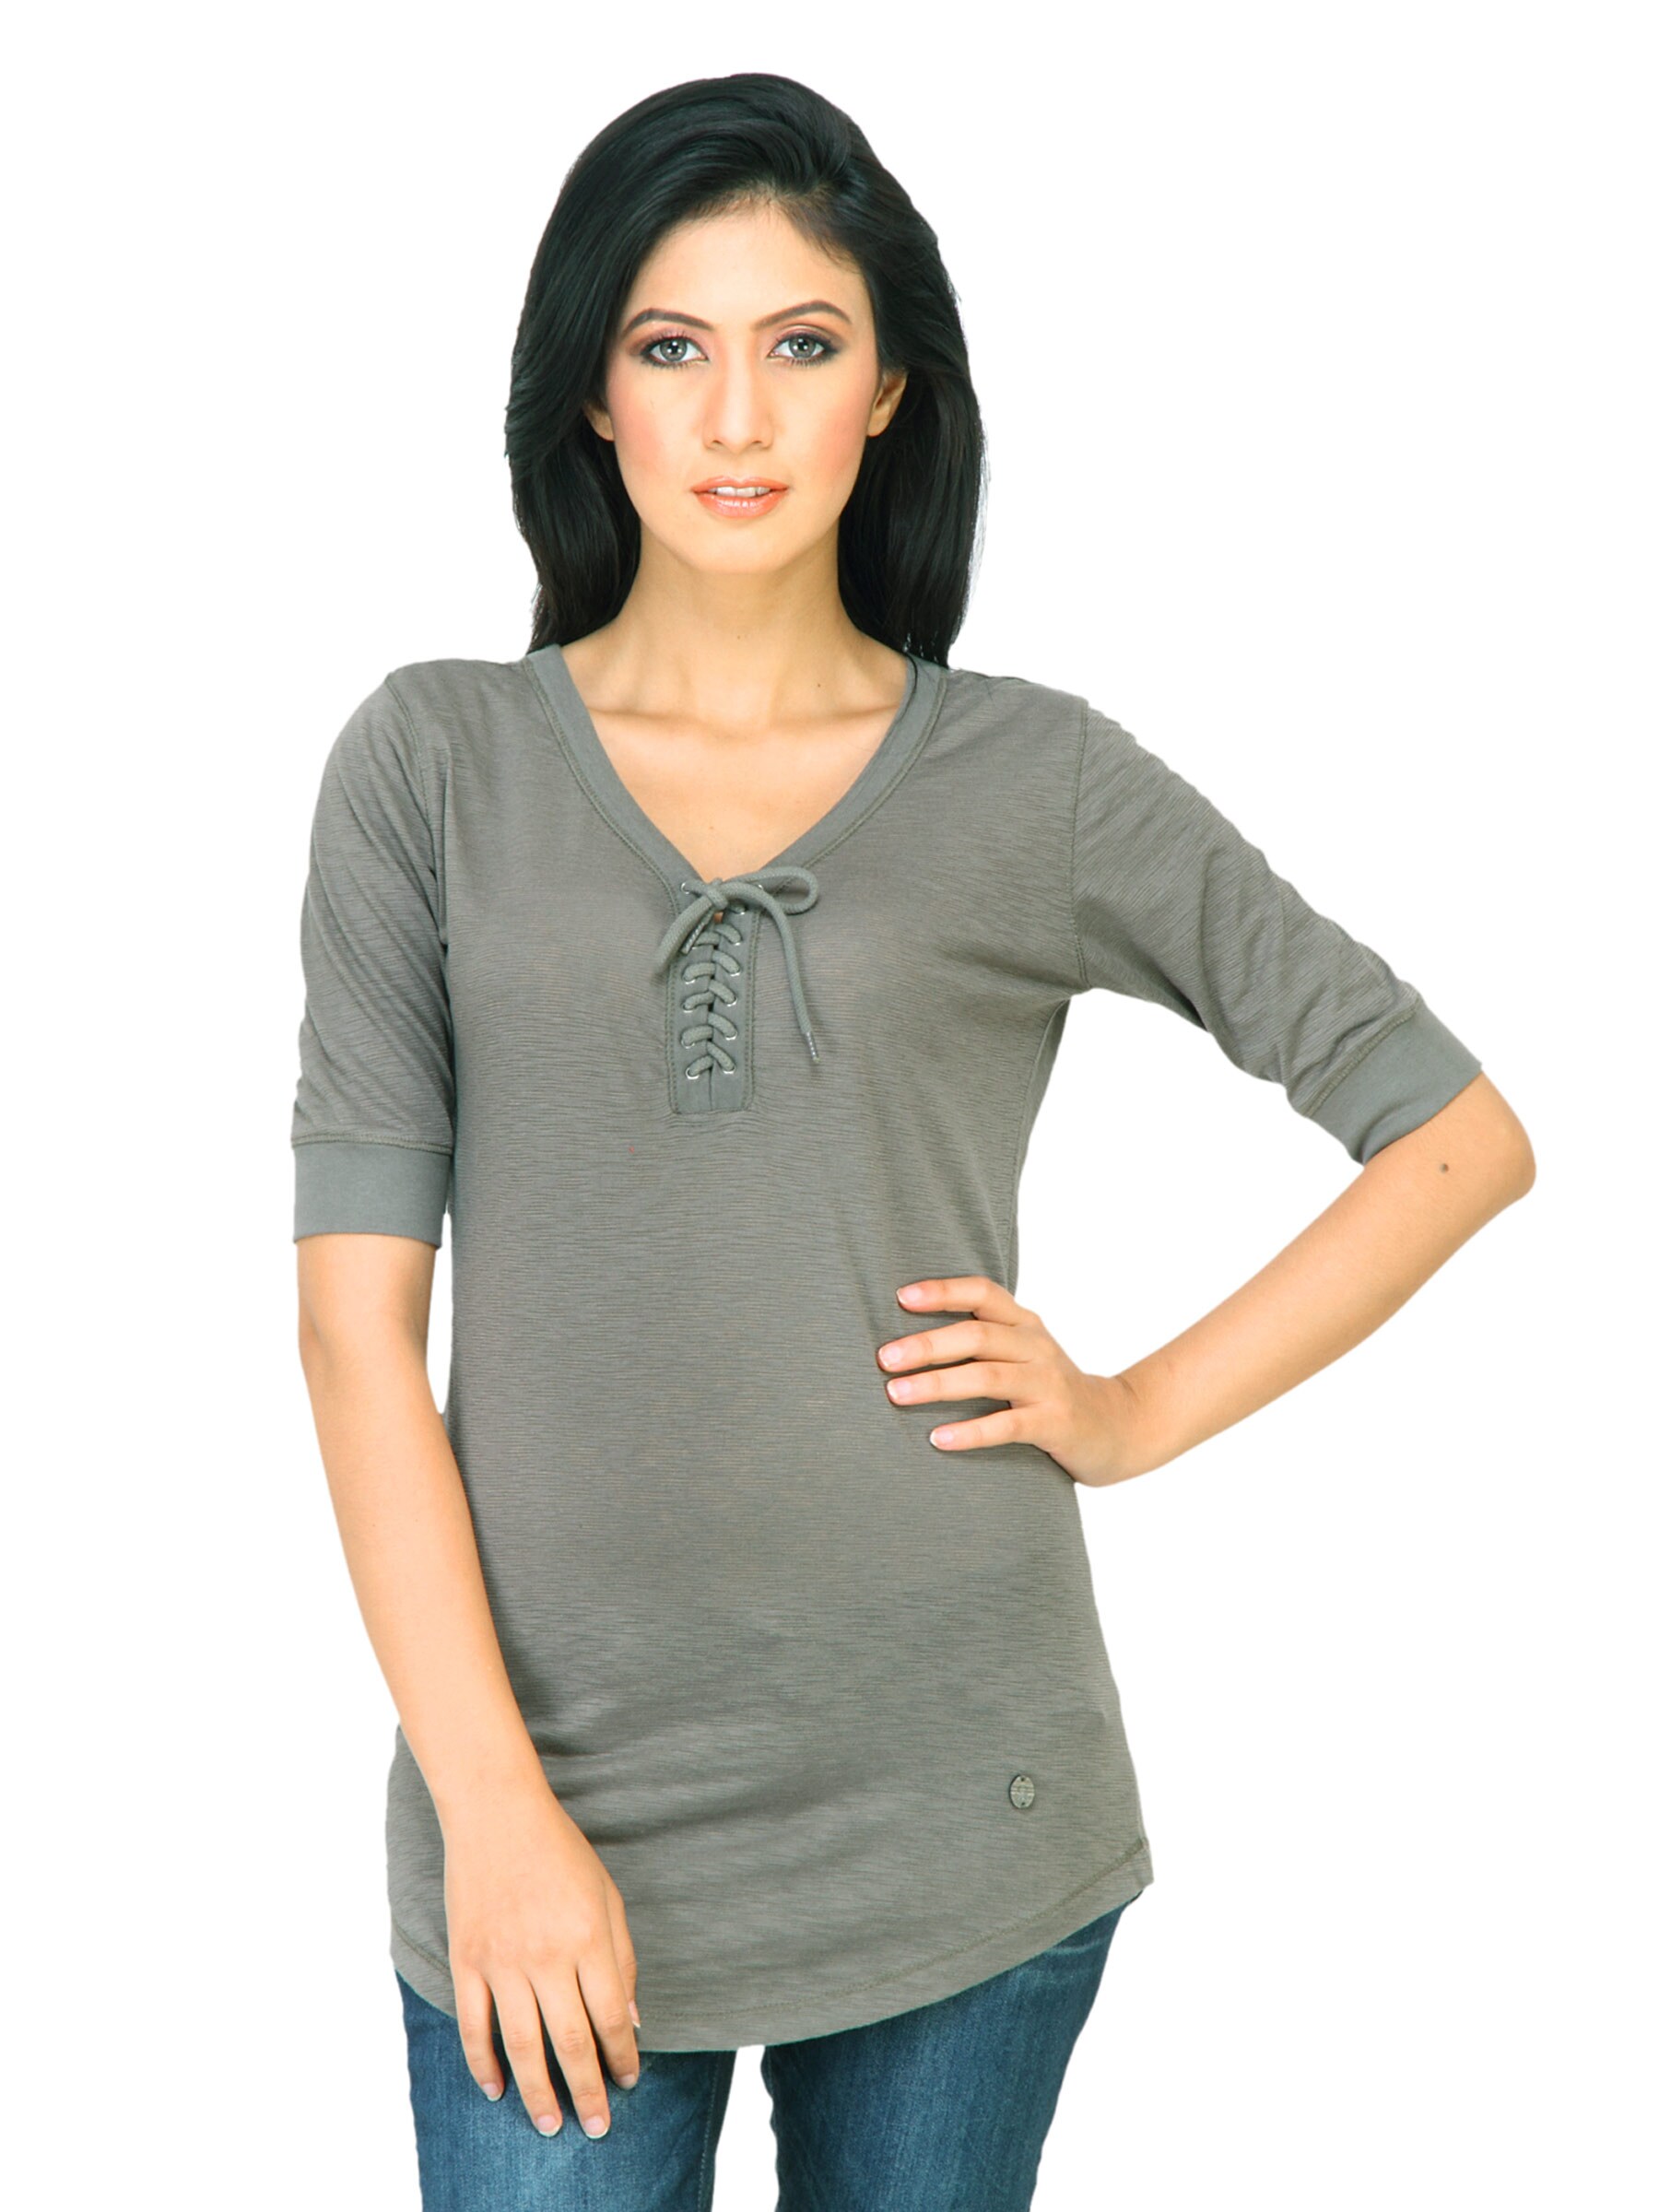 United Colors of Benetton Women Solid Grey Tops